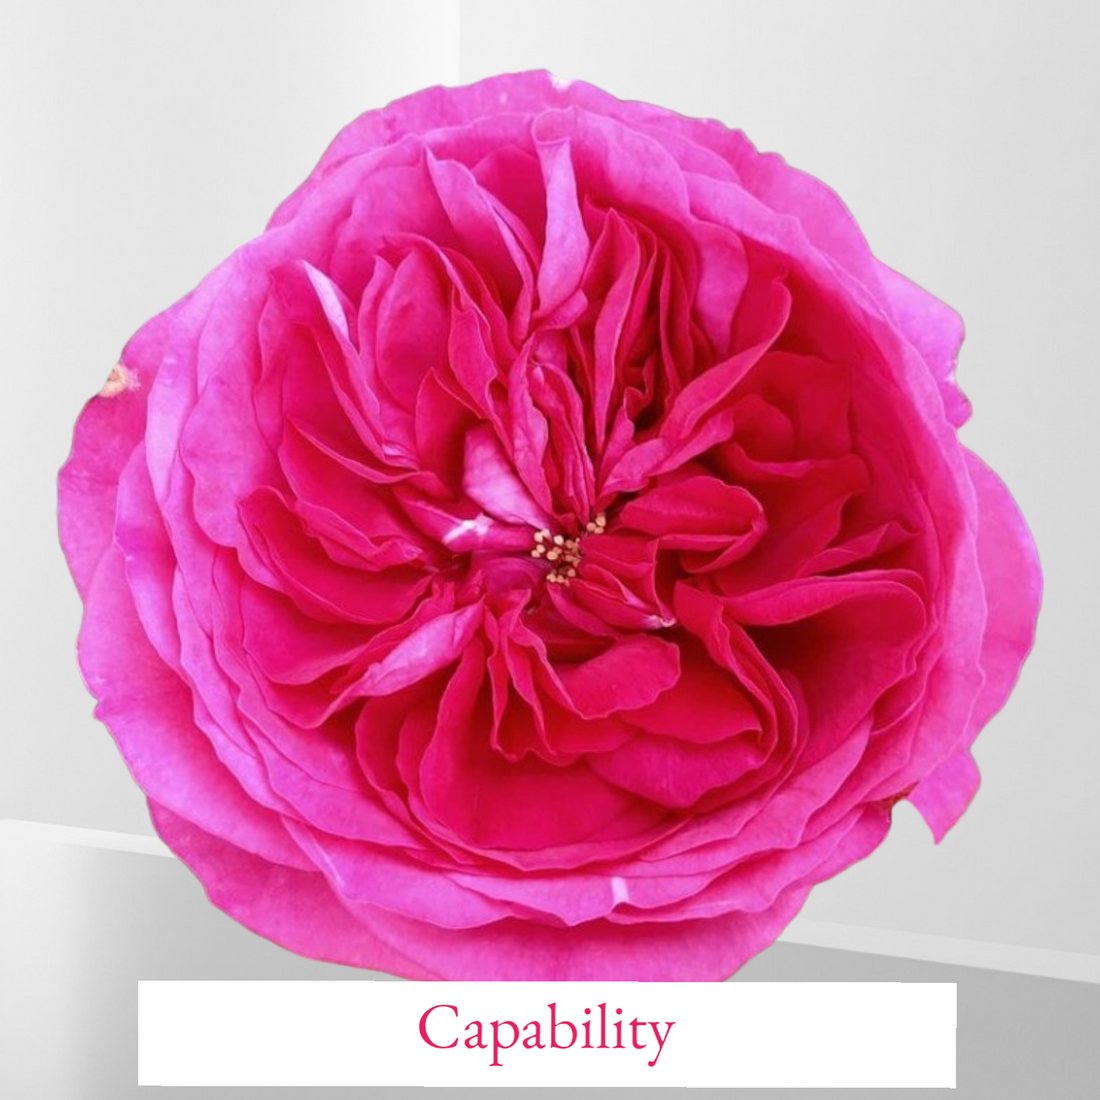 Capability Rose: A Floral Masterpiece of Fragrance, Color, and Resilience